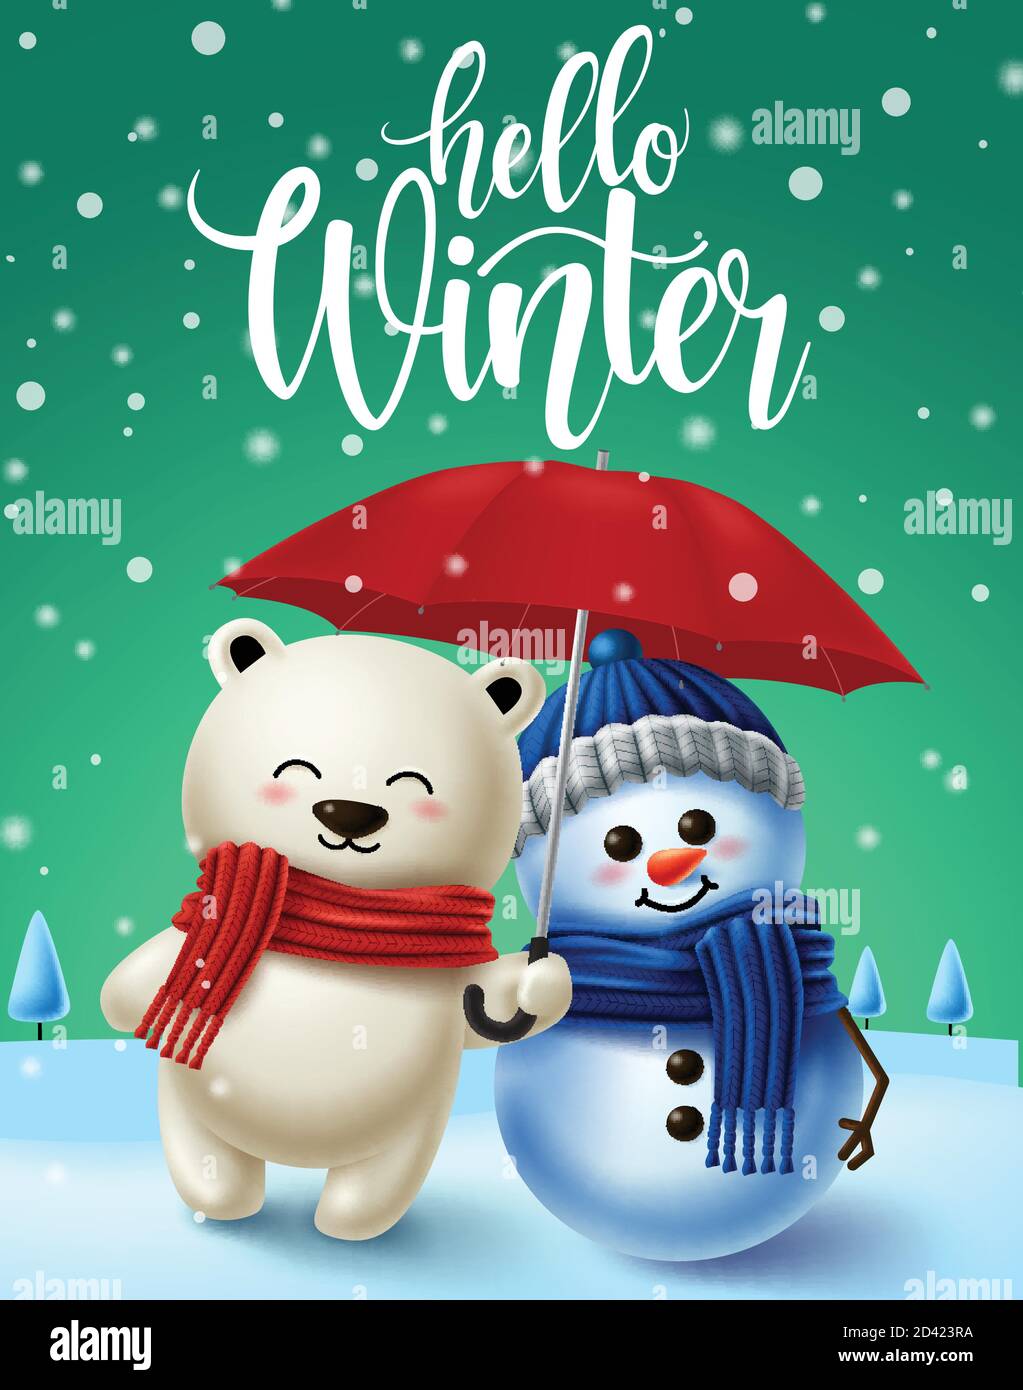 Winter character vector background design. Hello winter text in snowy winter background with 3d polar bear and snowman characters for winter season Stock Vector